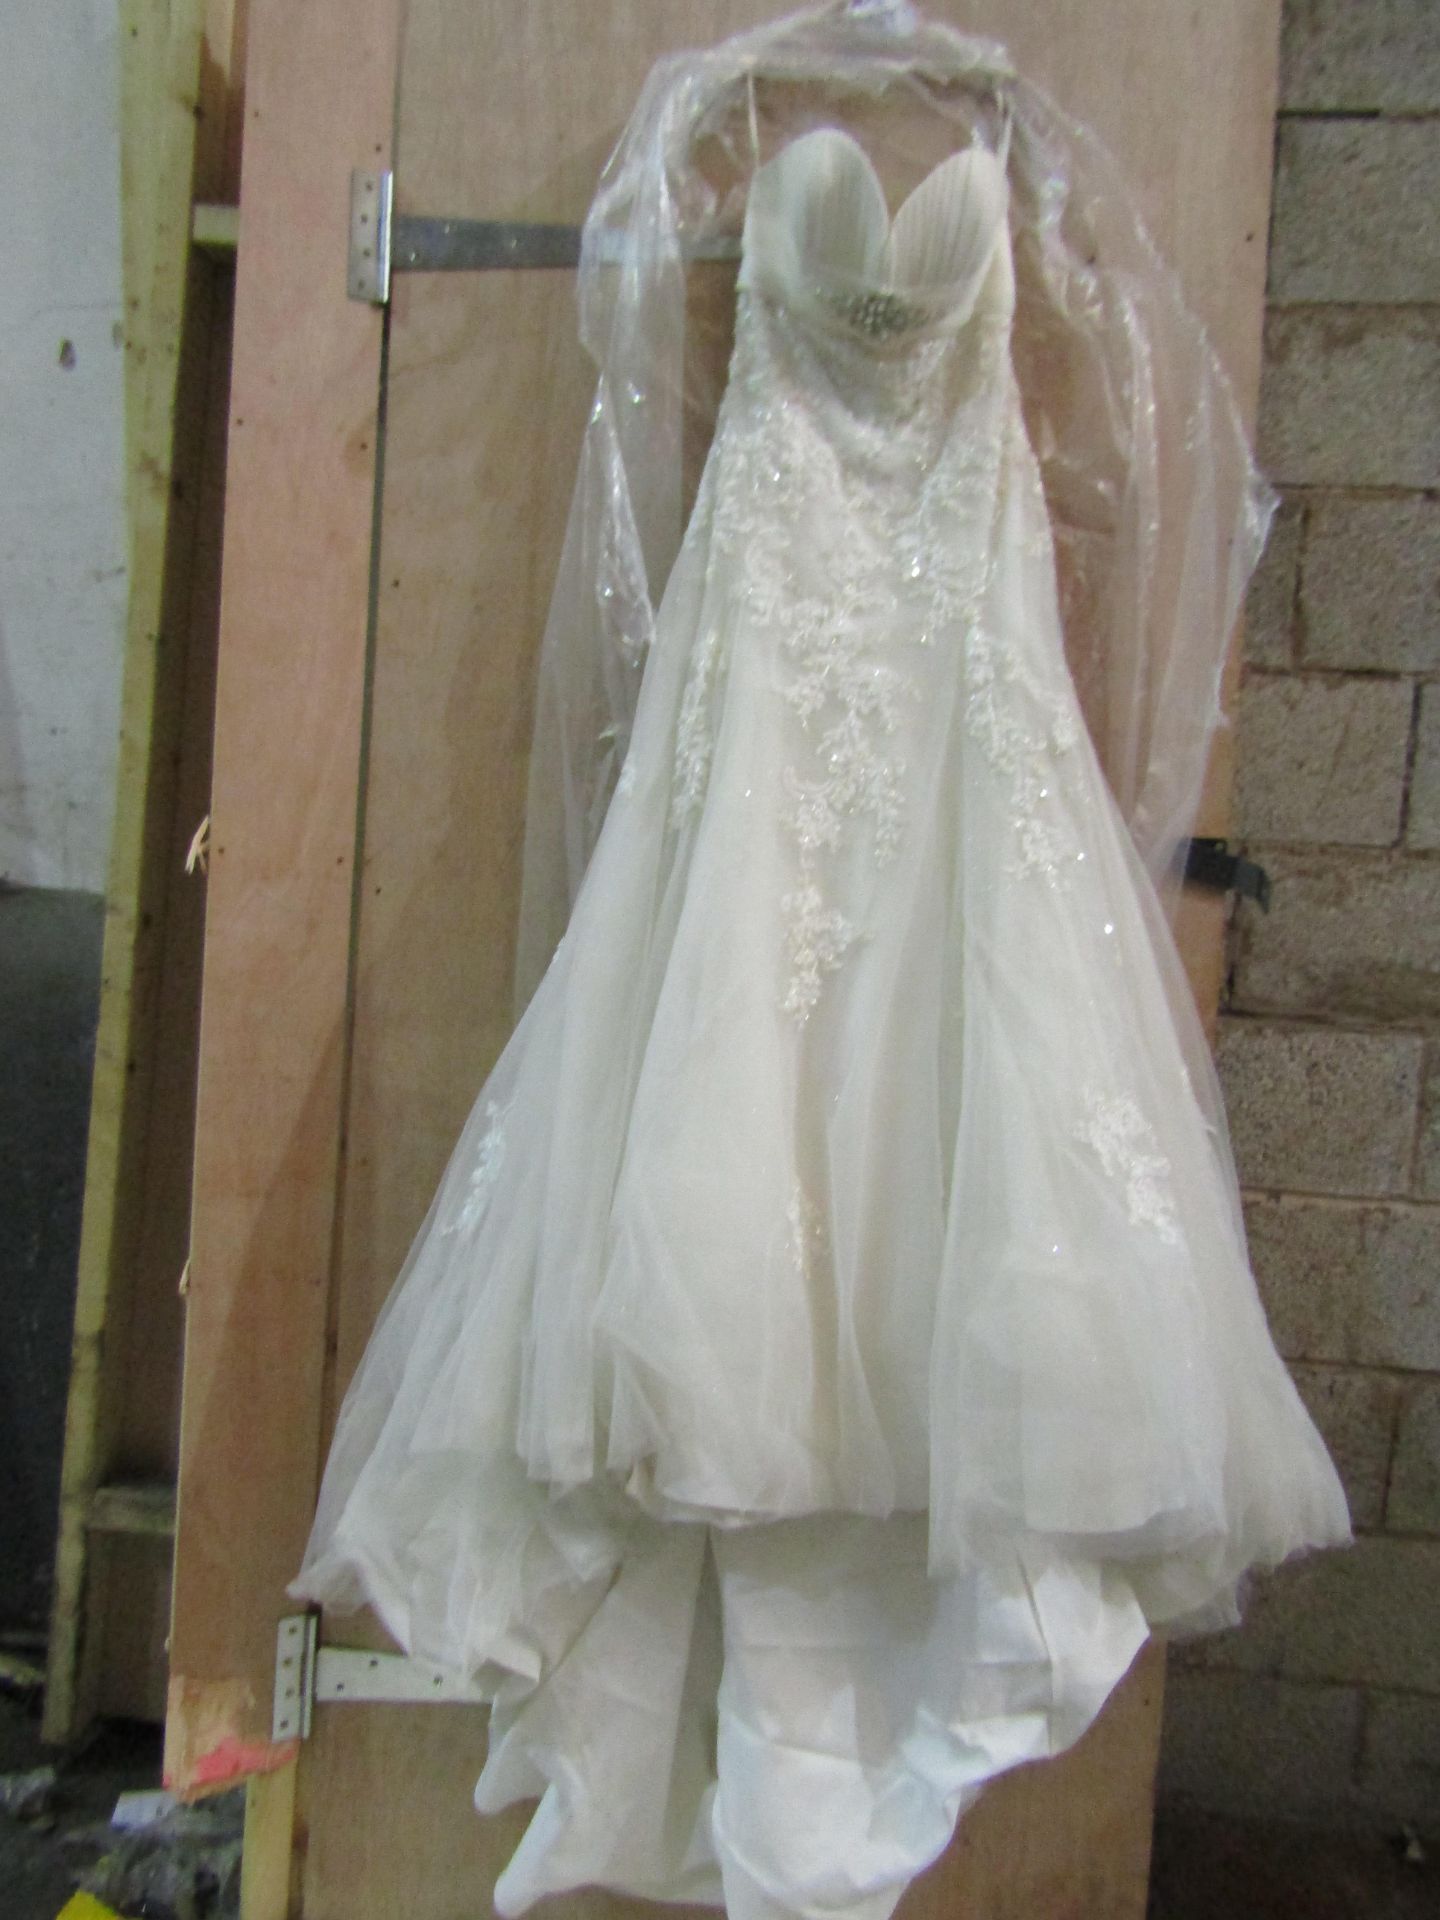 Approx 500 pieces of wedding shop stock to include wedding dresses, mother of the bride, dresses, - Image 17 of 43